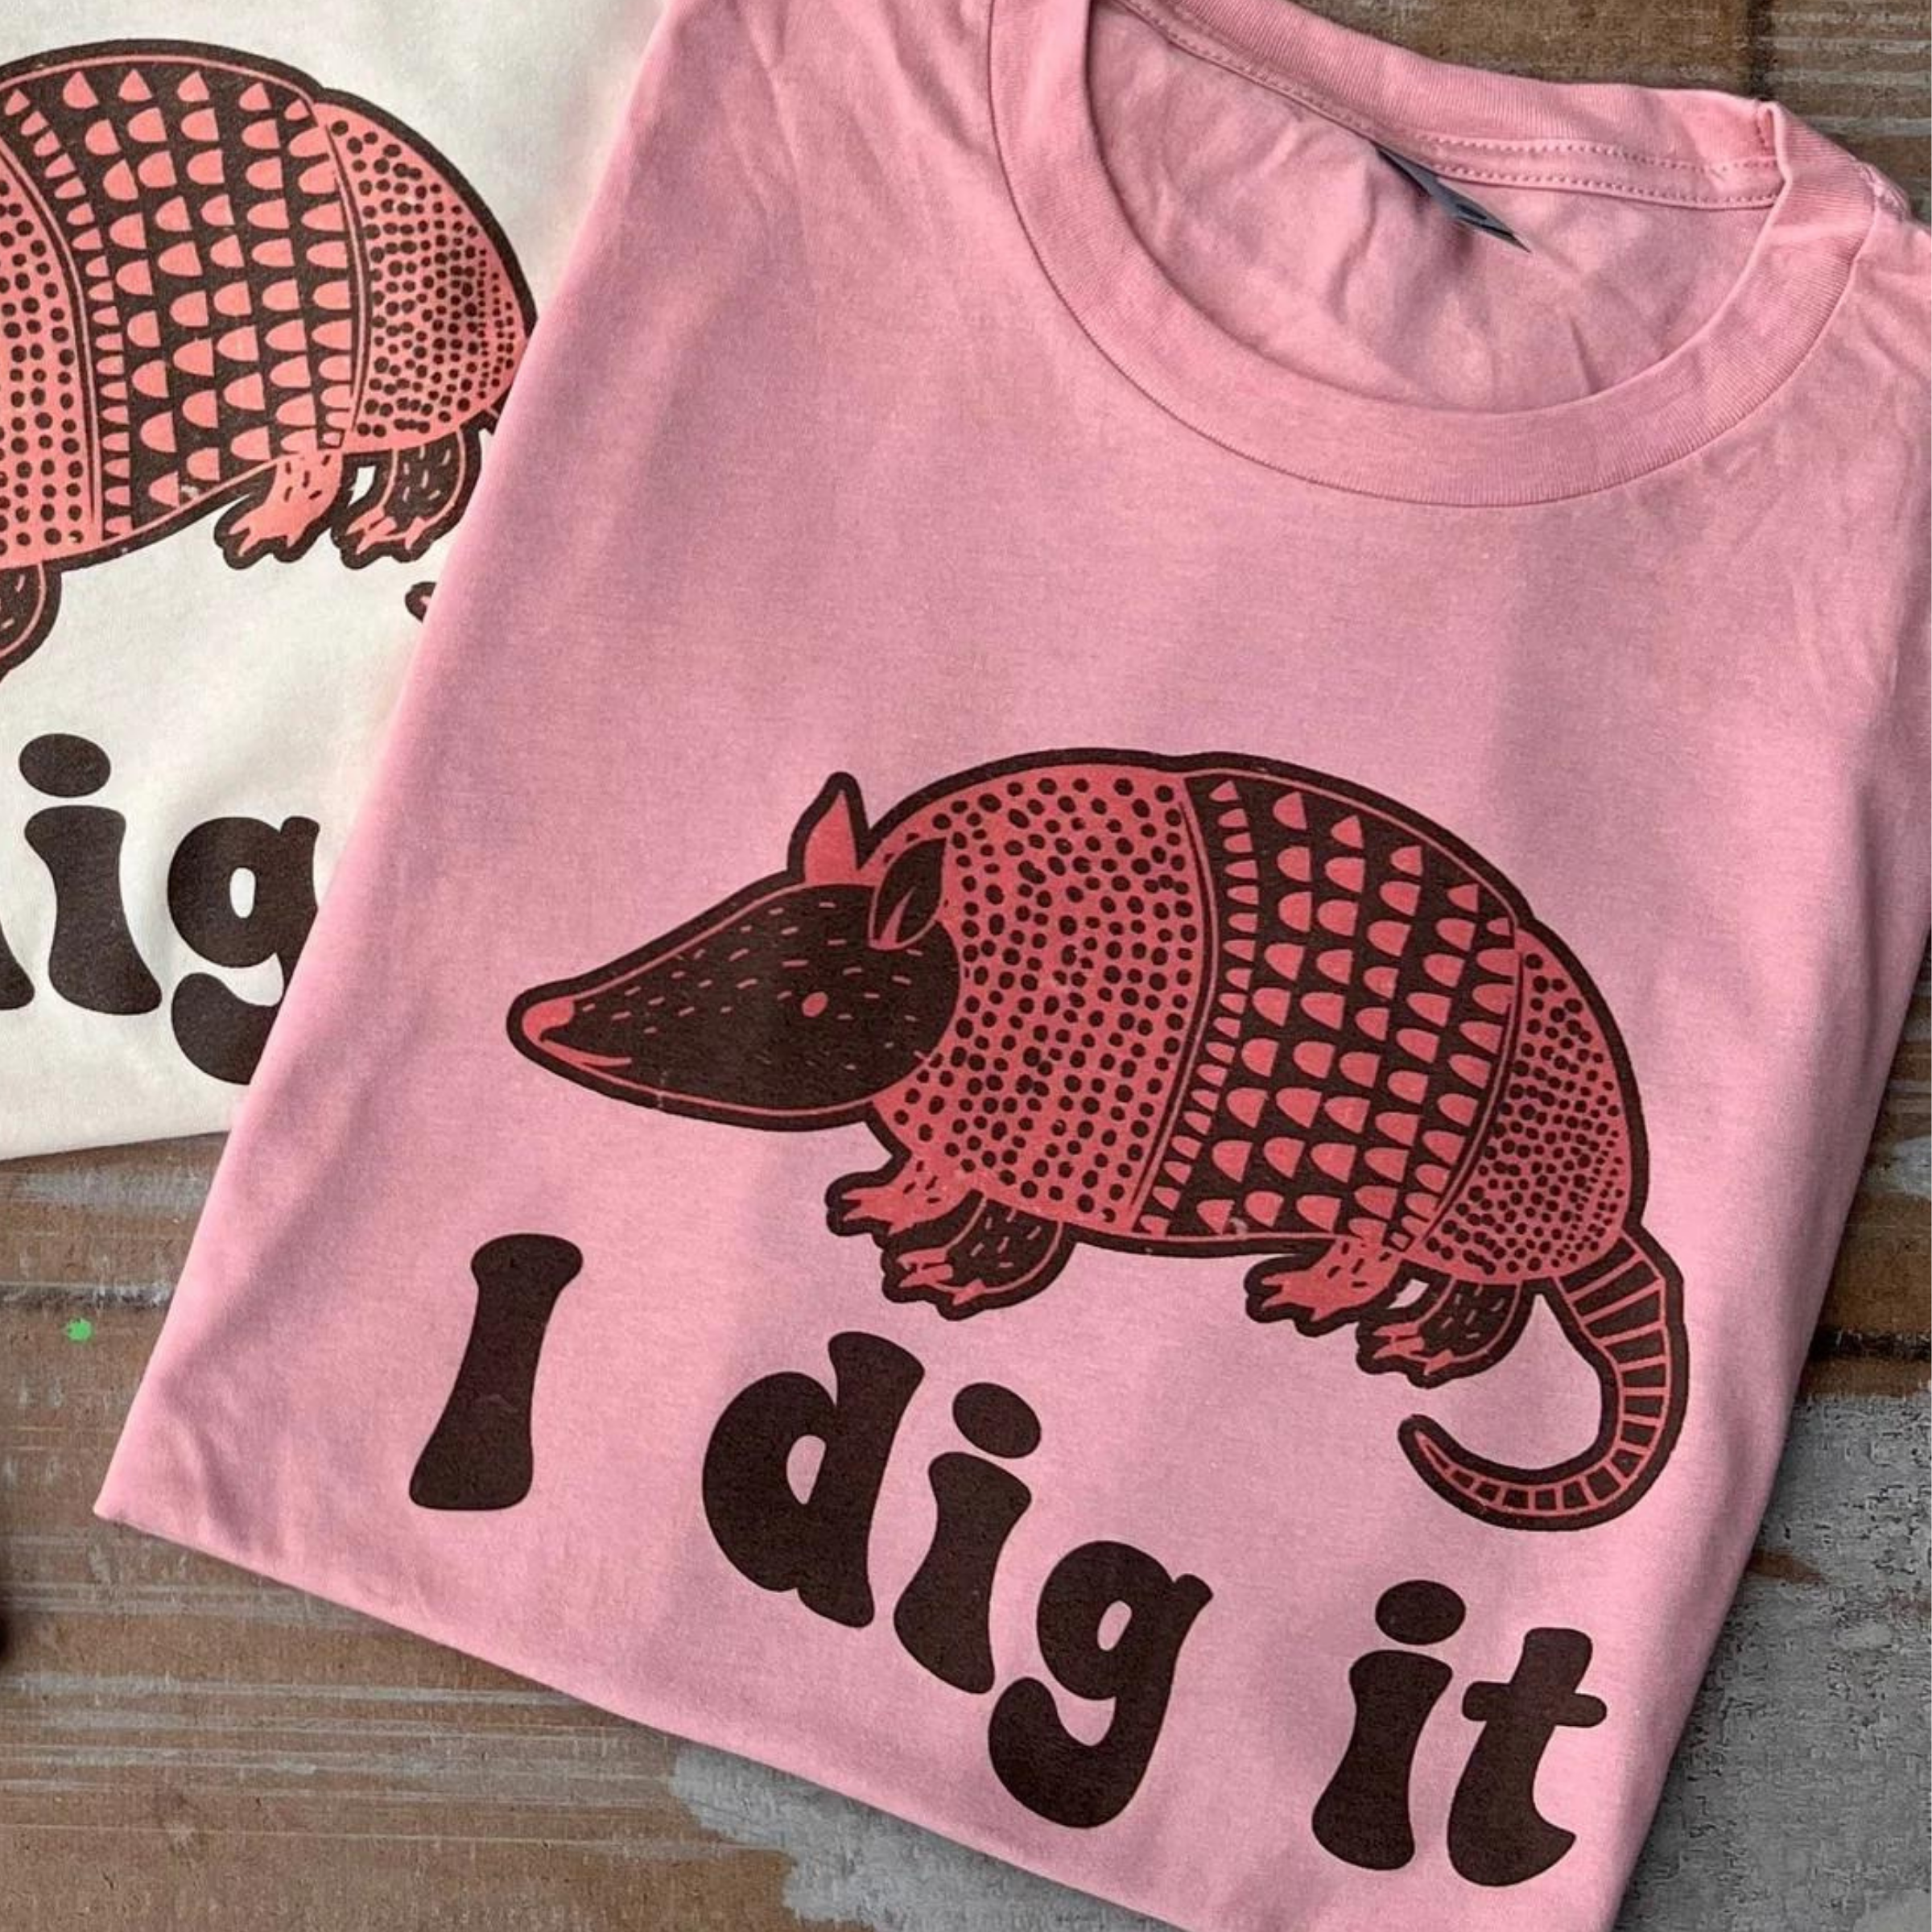 Online Exclusive | I Dig It Armadillo Graphic Tee in Desert Rose Pink